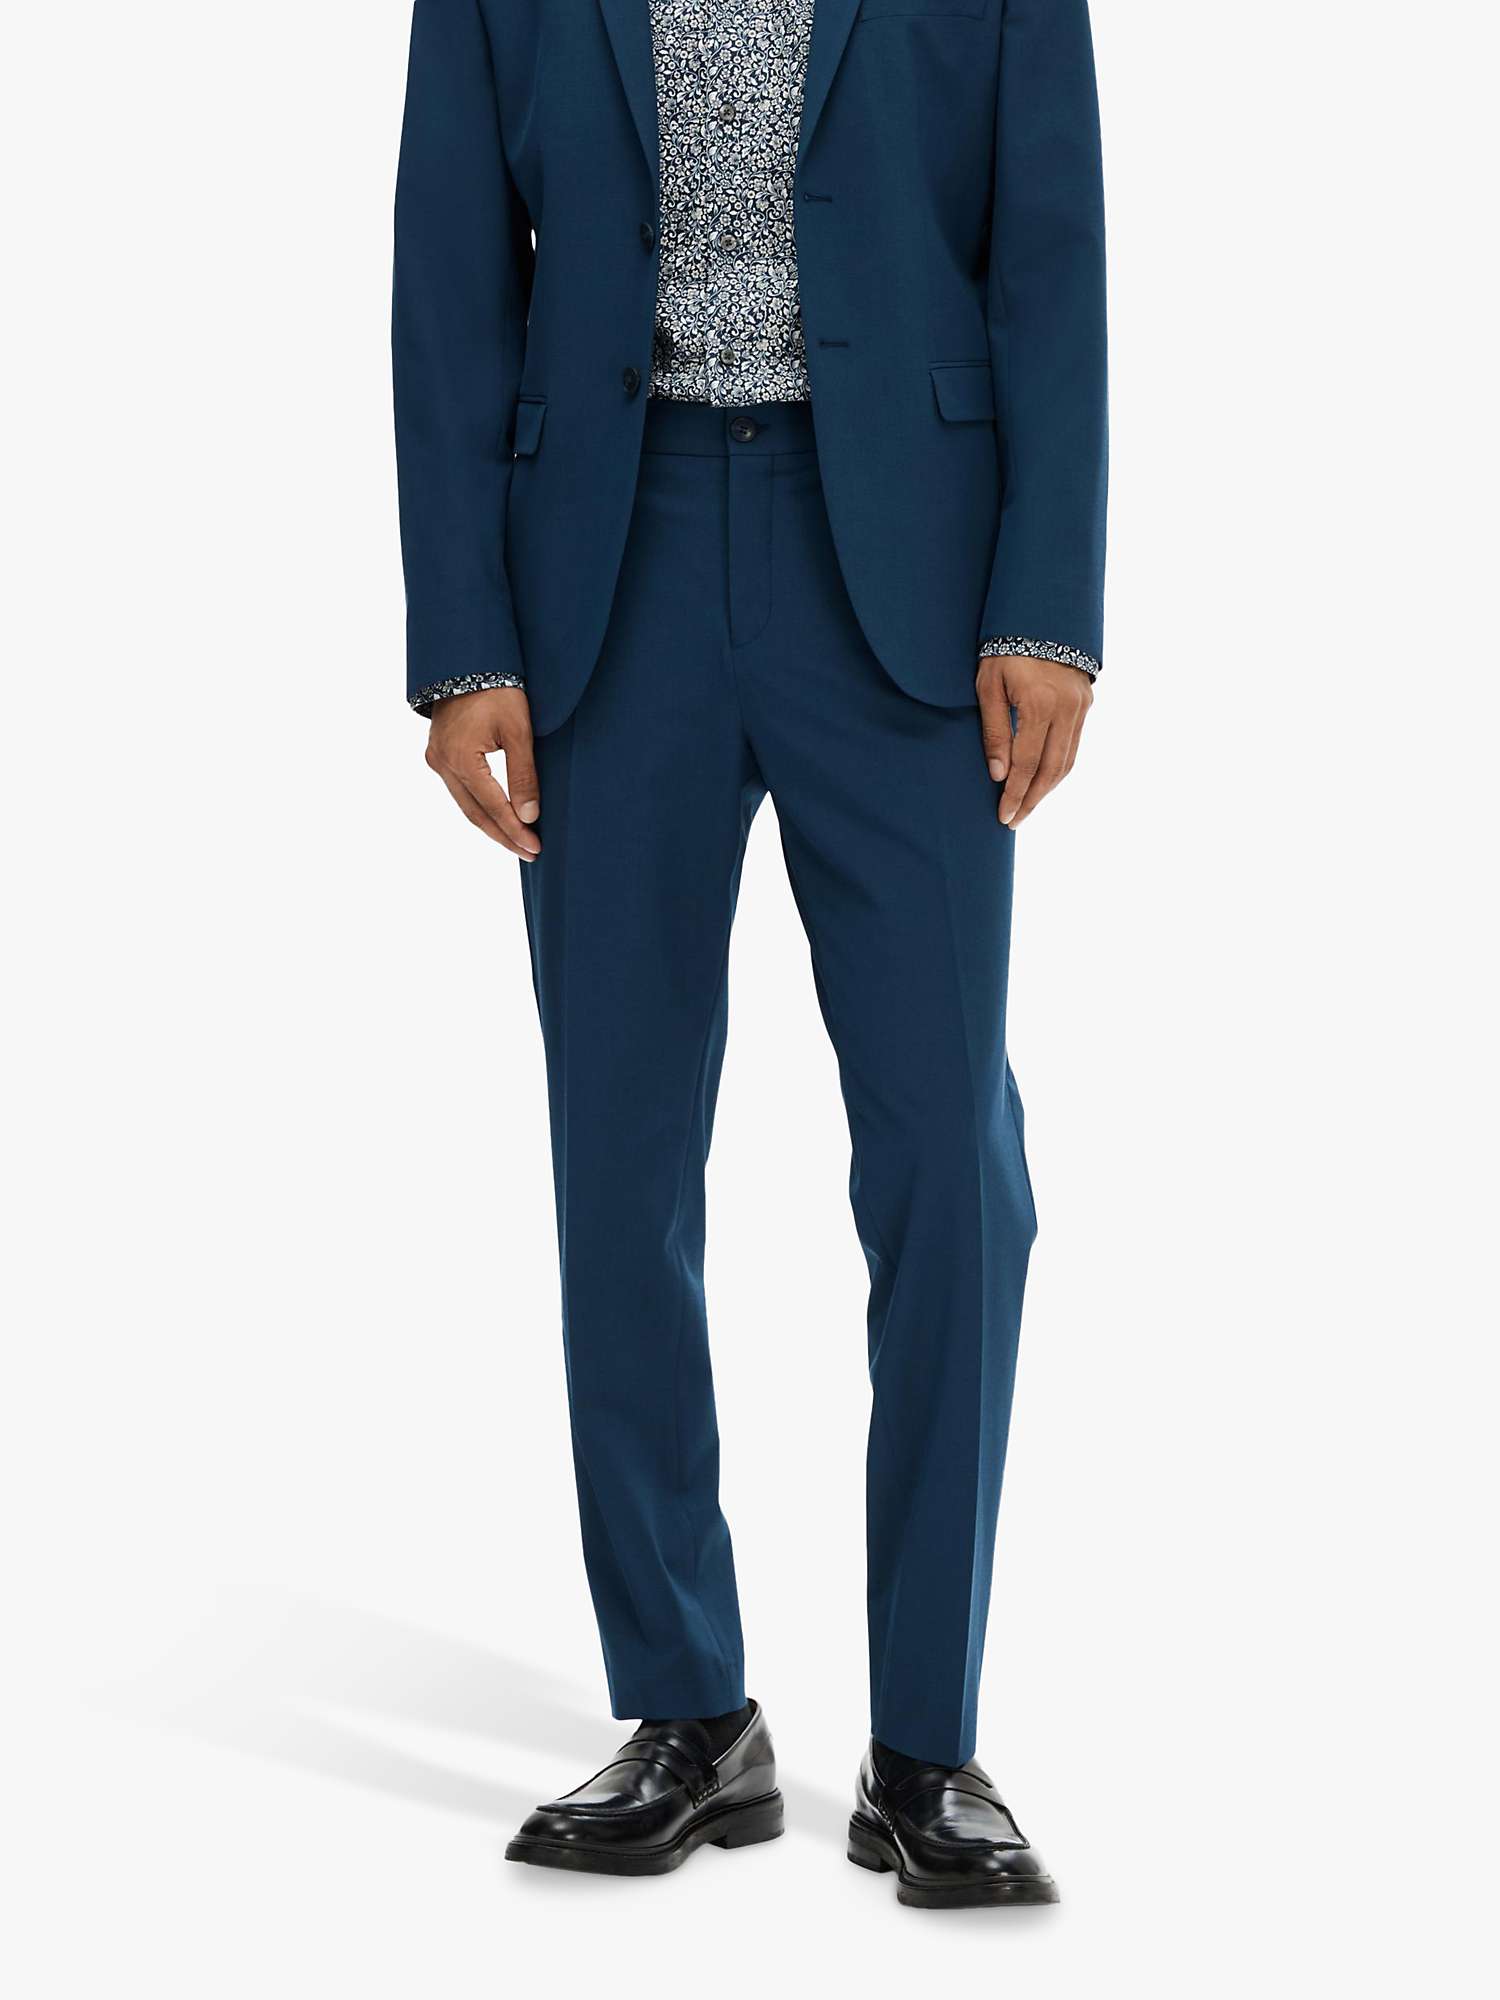 Buy SELECTED HOMME Liam Tailored Trousers, Blue Online at johnlewis.com